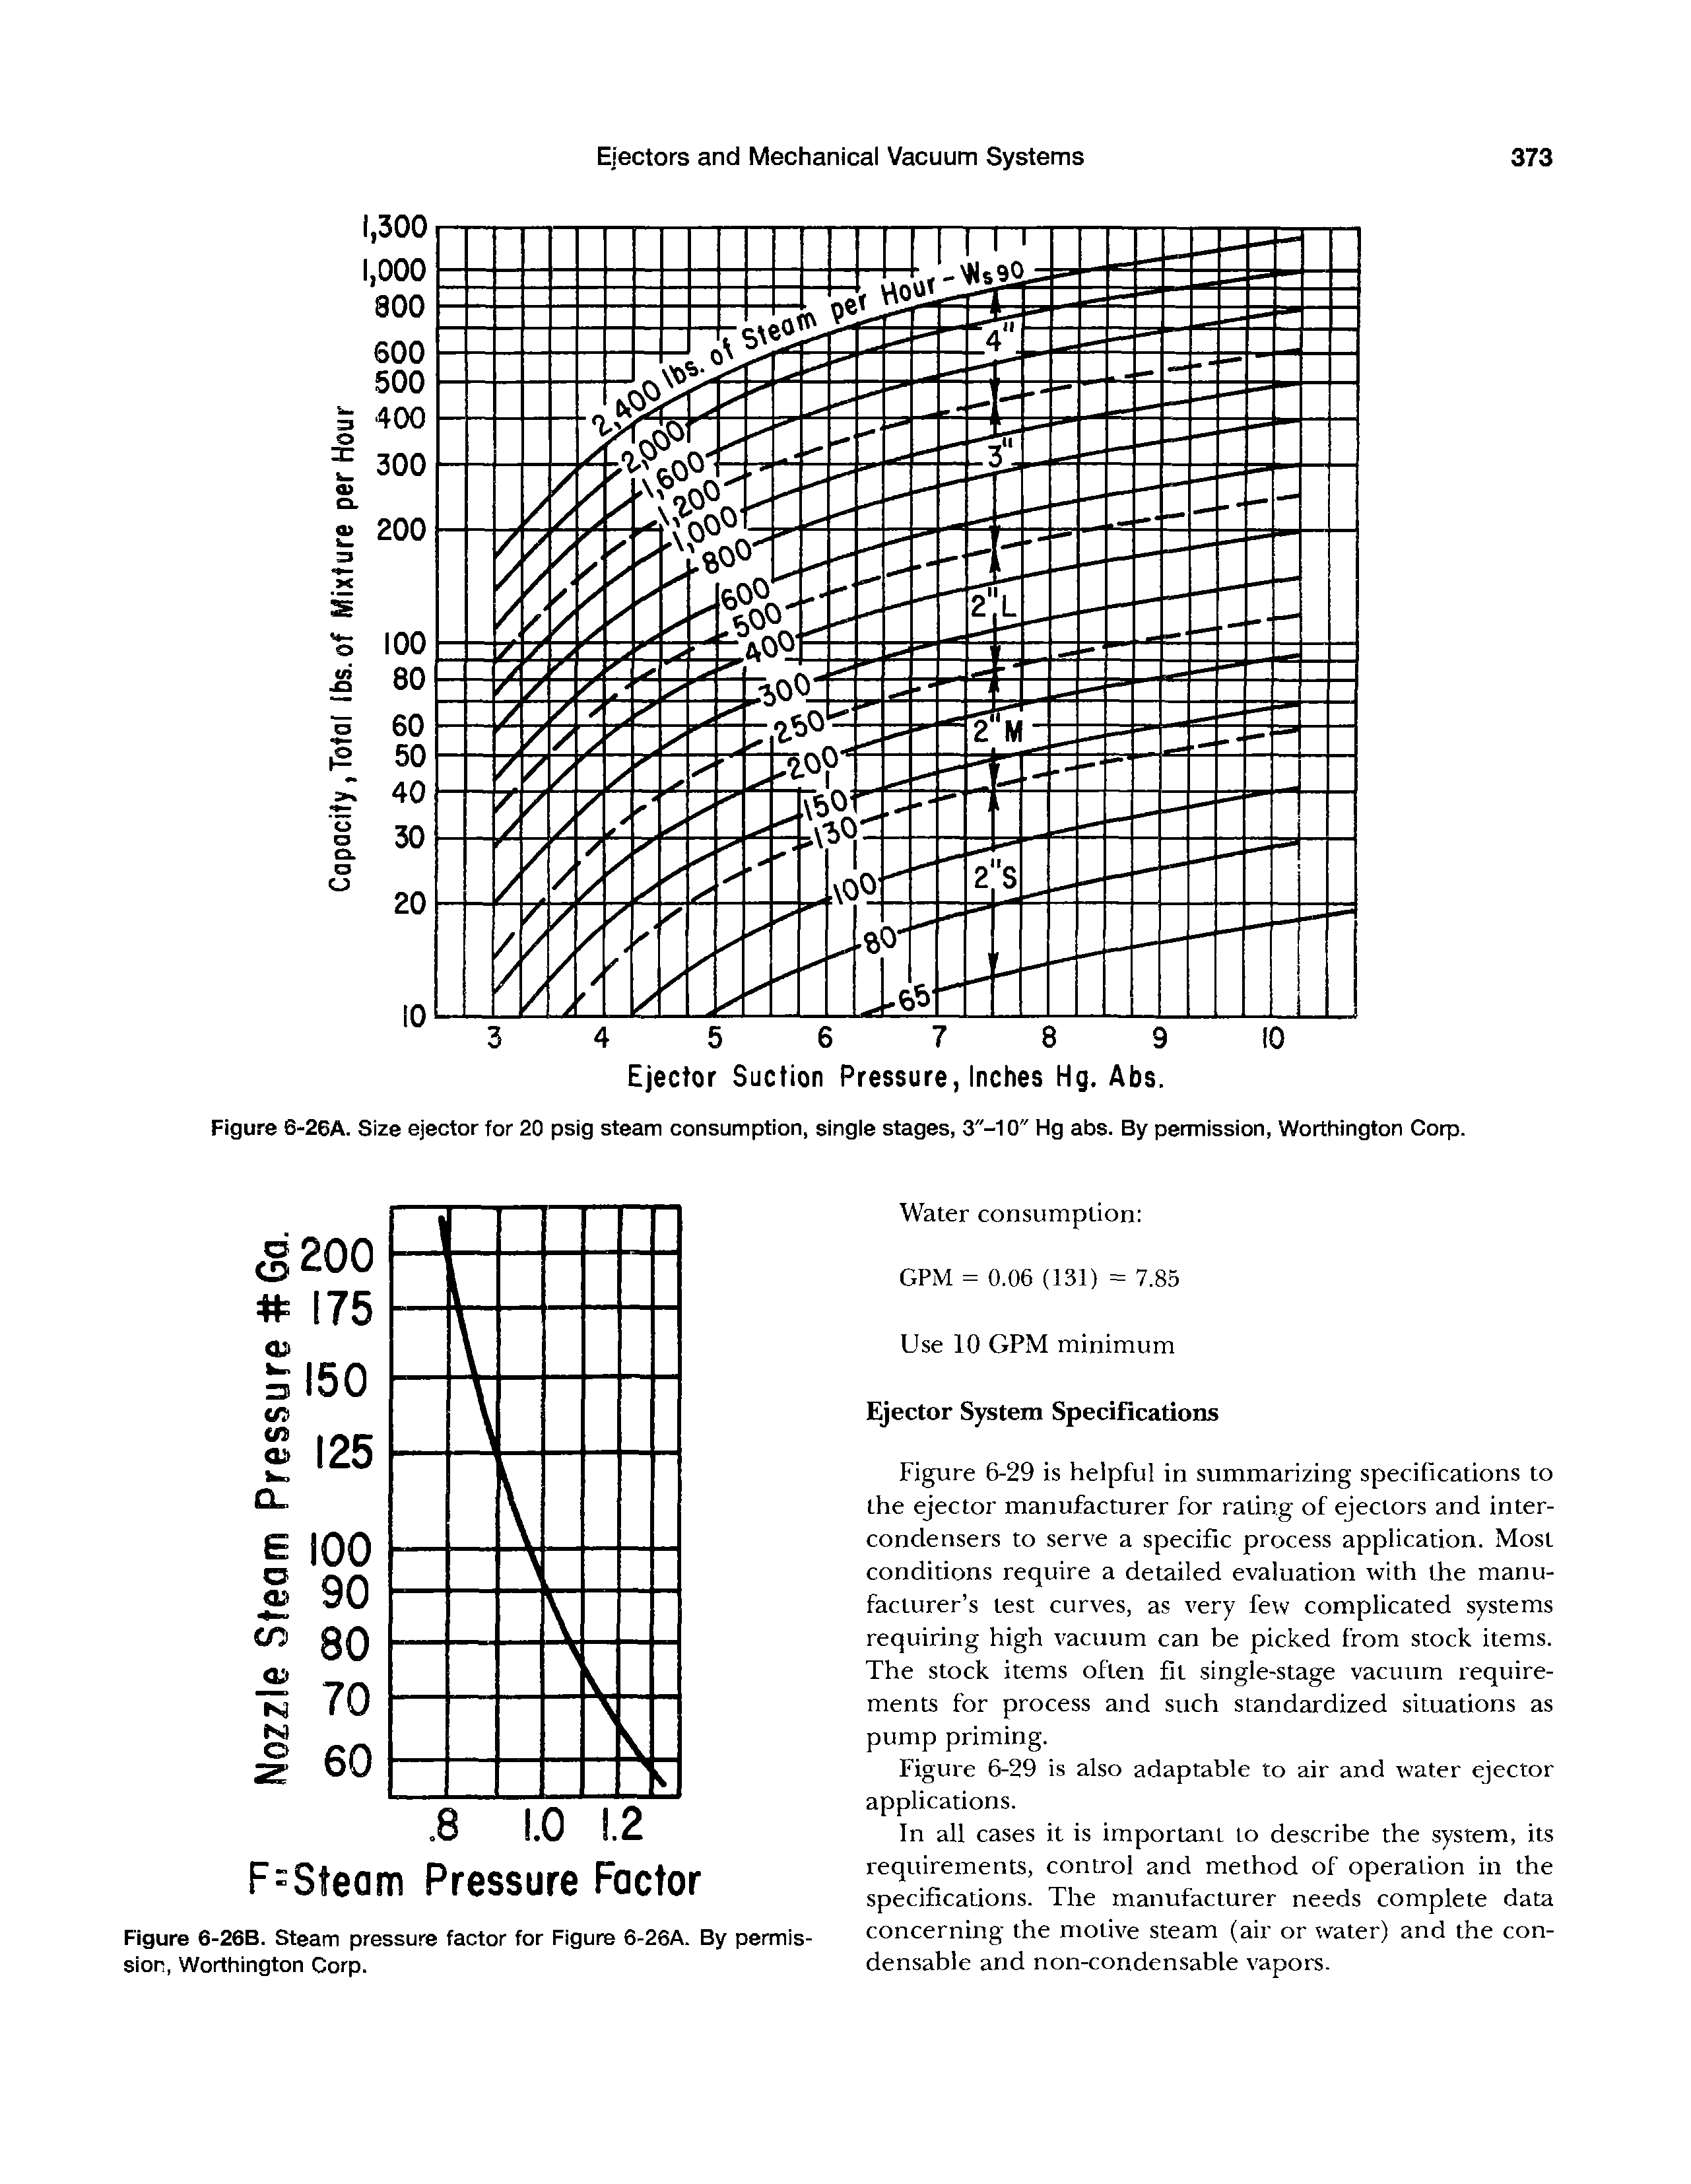 Figure 6-26B. Steam pressure factor for Figure 6-26A. By permission, Worthington Corp.